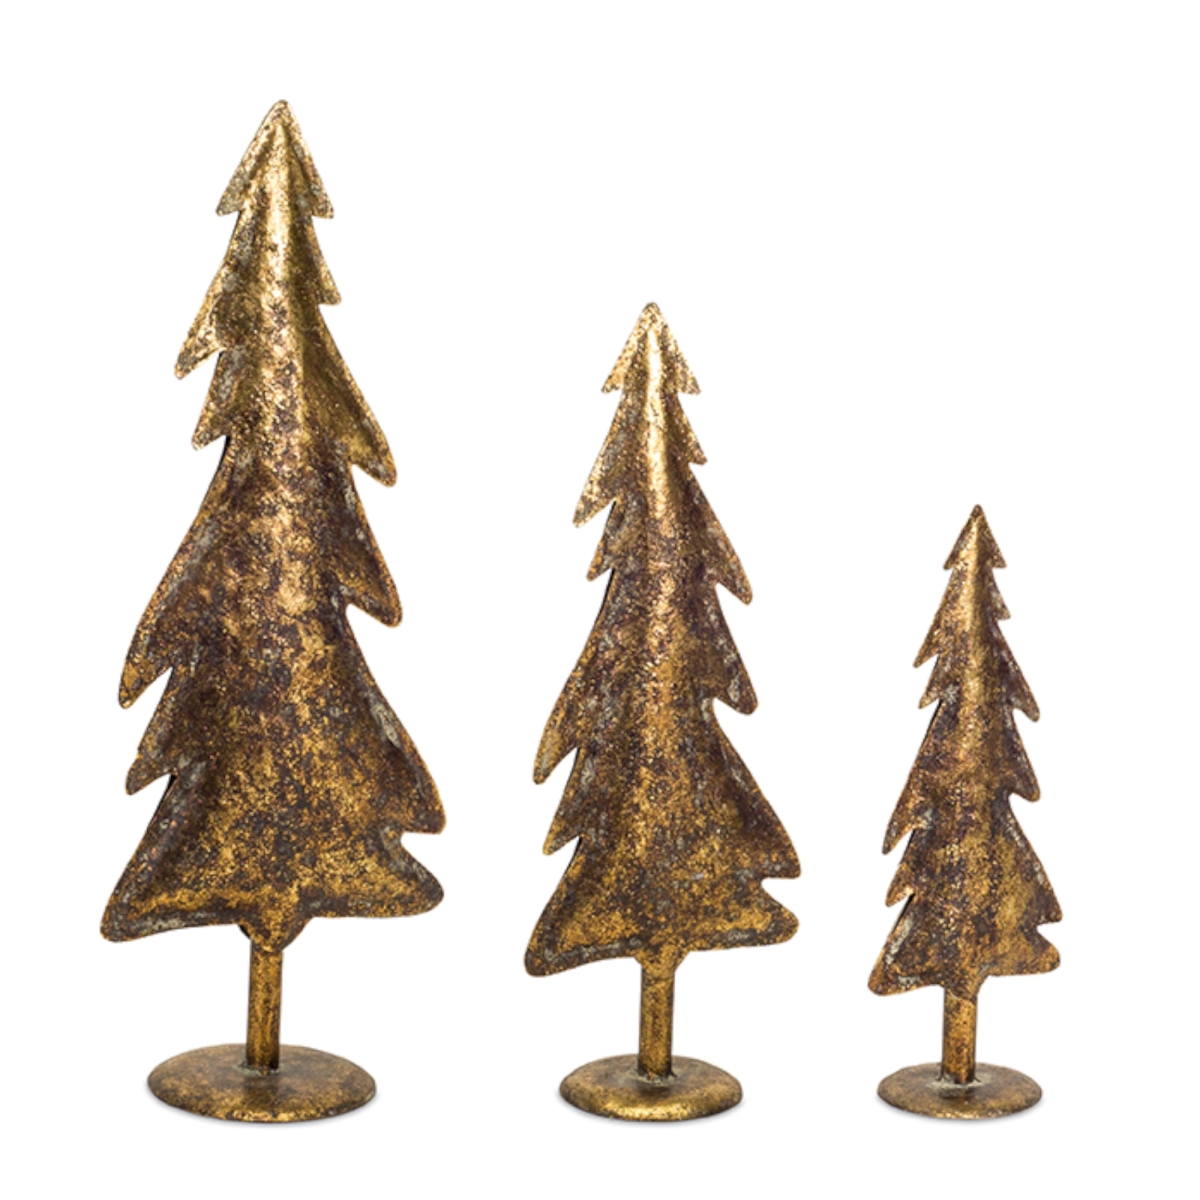 73570ds 13 X 17.5 X 22 In. Metal Tree Novelty Christmas Toy, Brown & Gold - Set Of 3